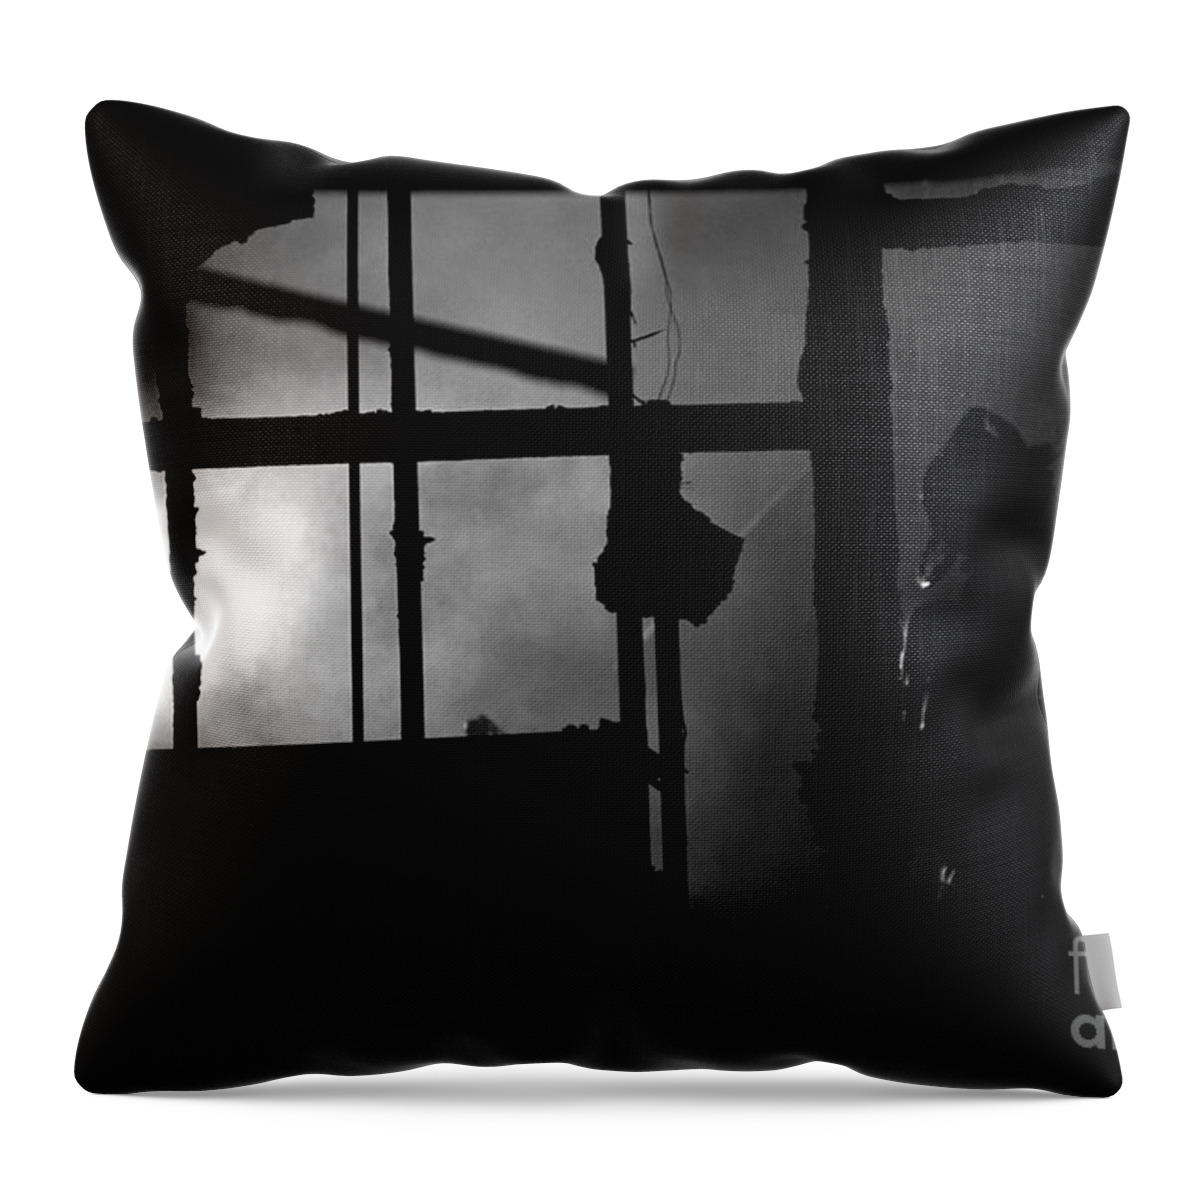 Firefighter Throw Pillow featuring the photograph Pulling Ceiling by Frank J Casella